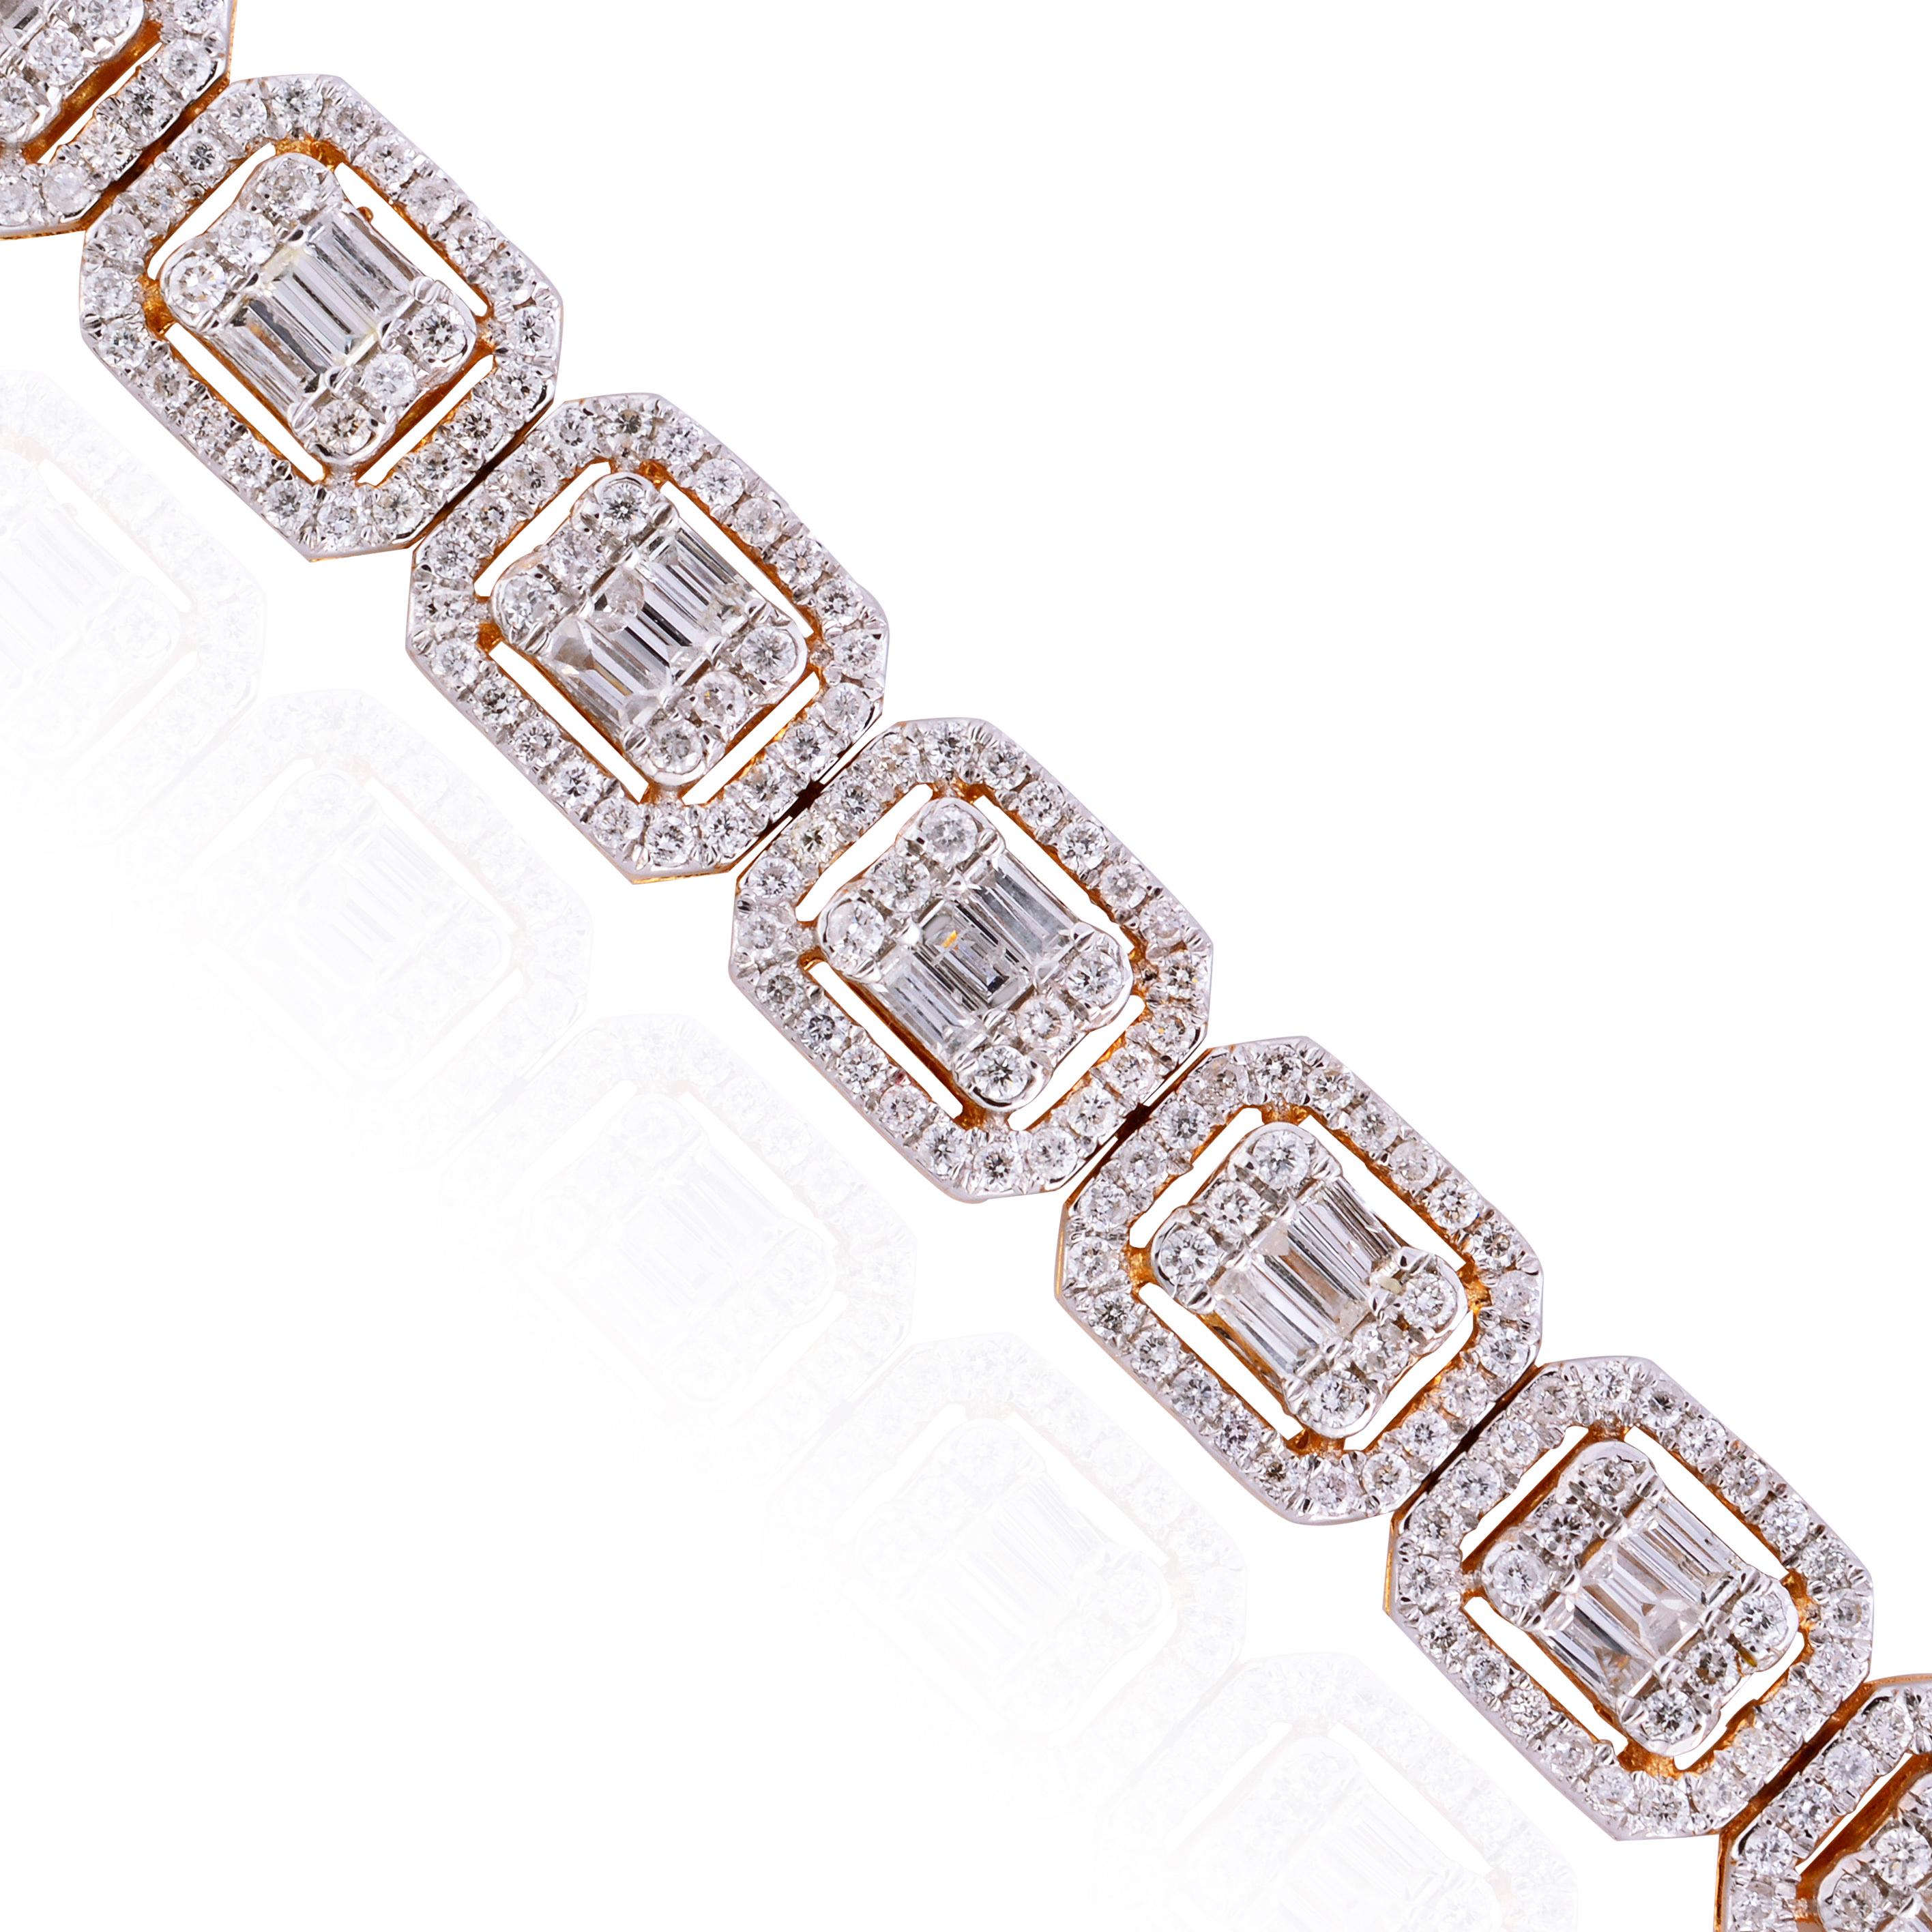 Code :- CN-25372
Gross Wt. :- 14.83 gm
14k Yellow Gold Wt. :- 13.89 gm
Natural Diamond Wt. :- 4.65 Ct. ( AVERAGE DIAMOND CLARITY SI1-SI2 & COLOR H-I )
Bracelet Length :- 7 Inch
✦ Sizing
.....................
We can adjust most items to fit your